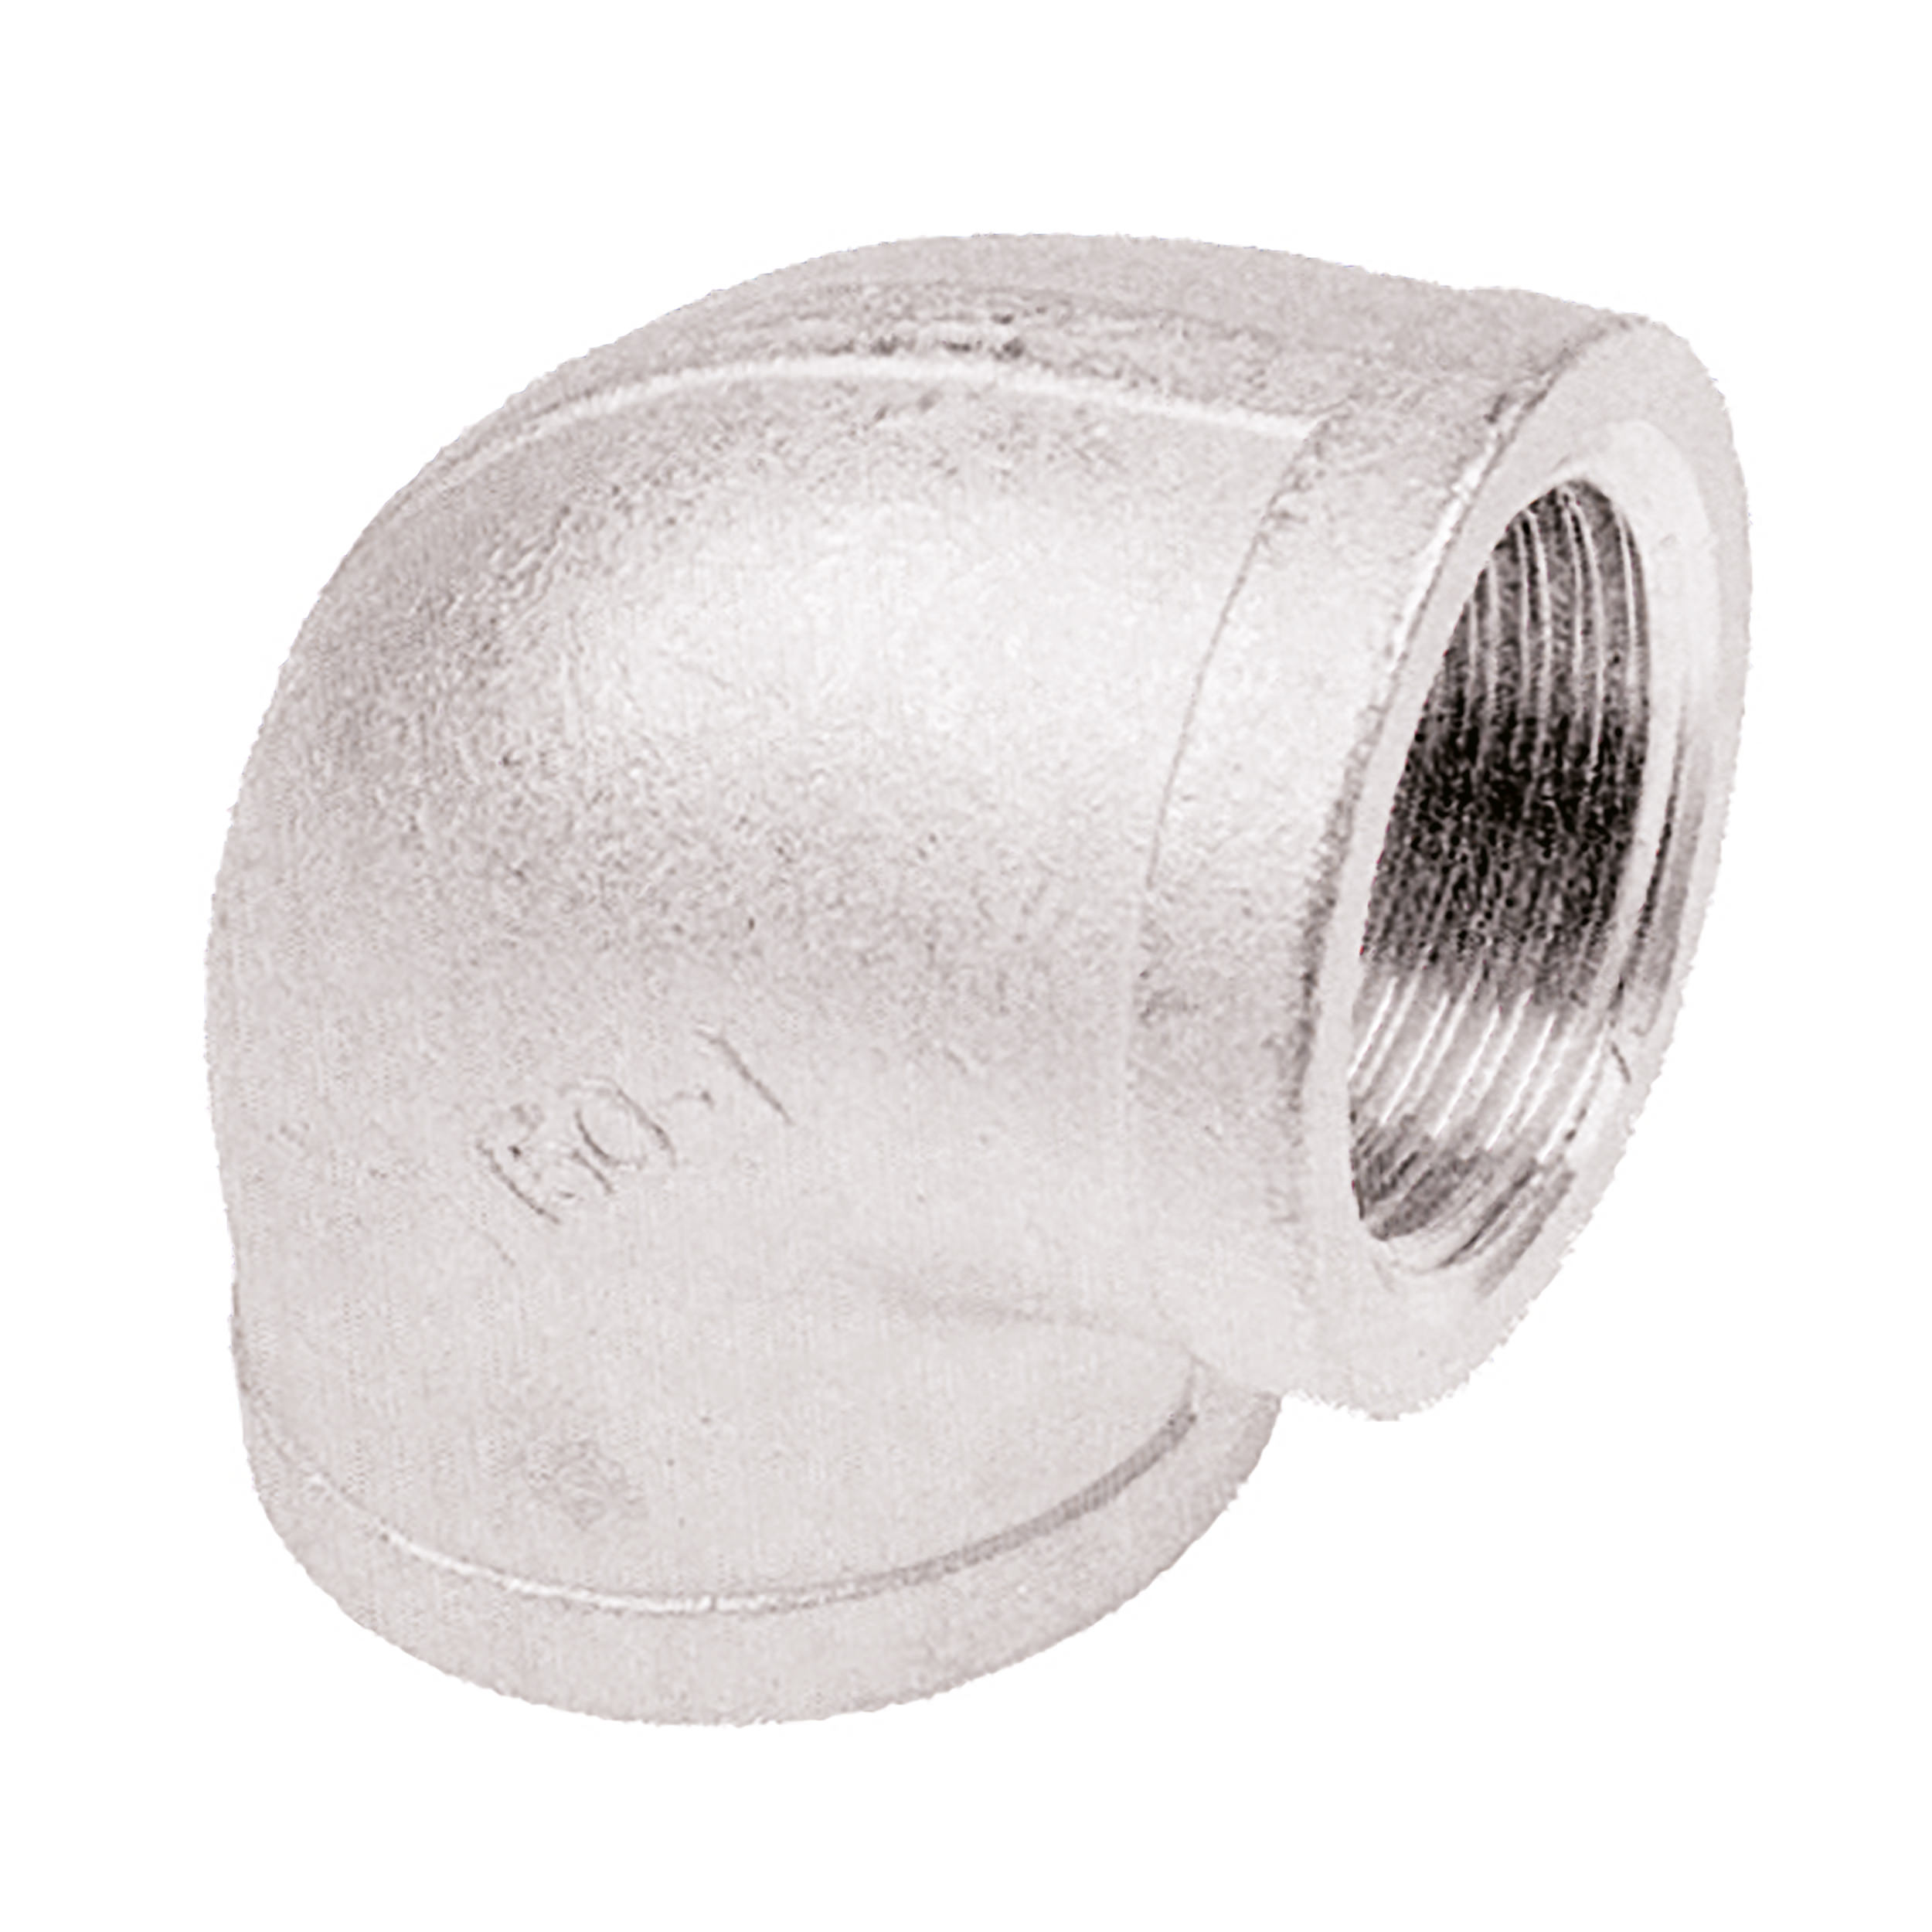 Elbow 90° stainless steel, V4A, connection: G⅛ female (female: cylindrical/DIN ISO 228) dimensions: length: 8 mm, DN 6, Ø15 mm